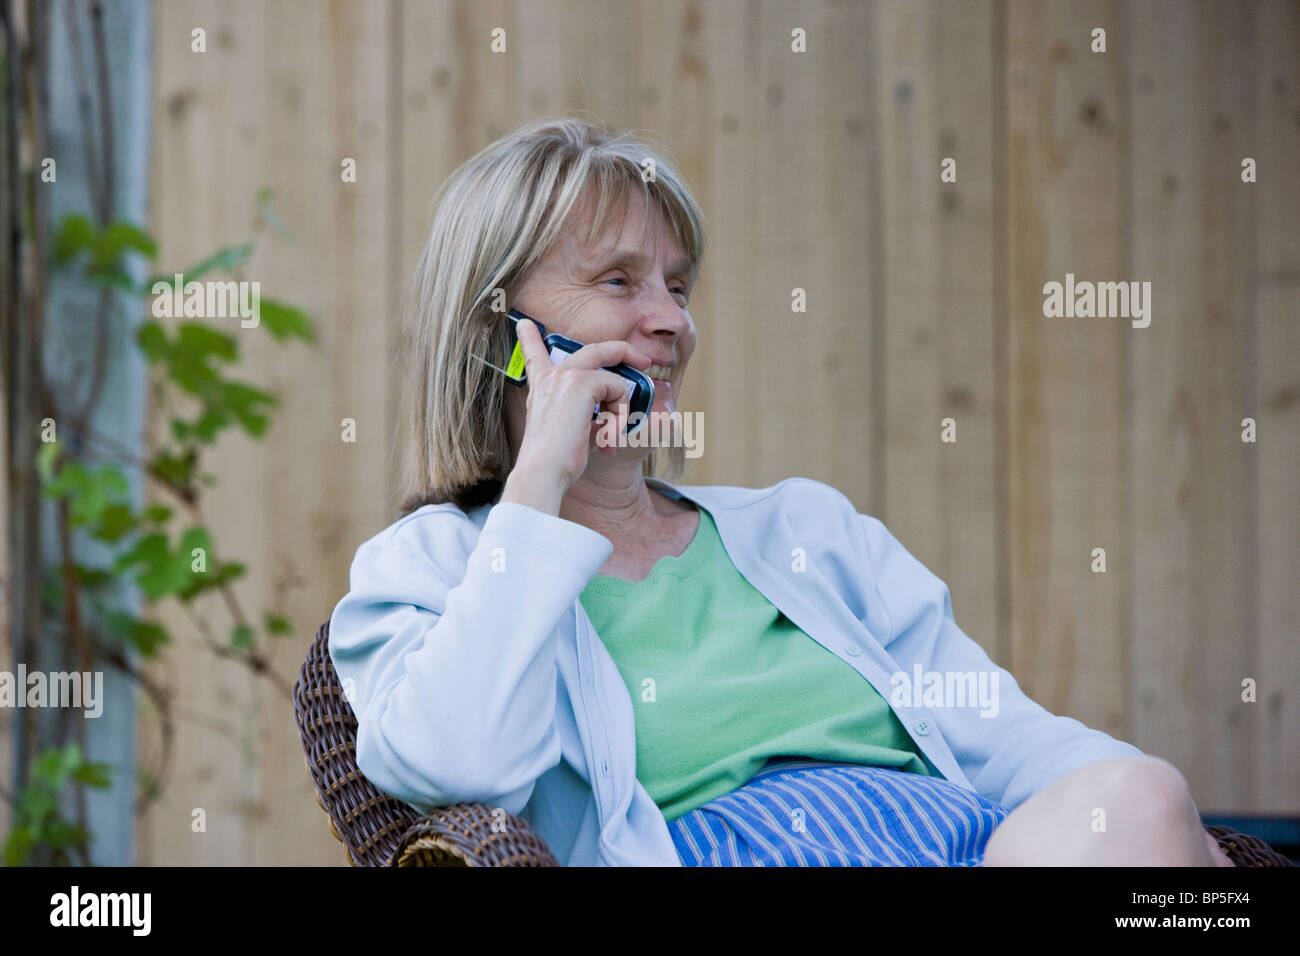 Middle aged woman talking on a telephone while seated in a wicker chair in a residential yard. Stock Photo